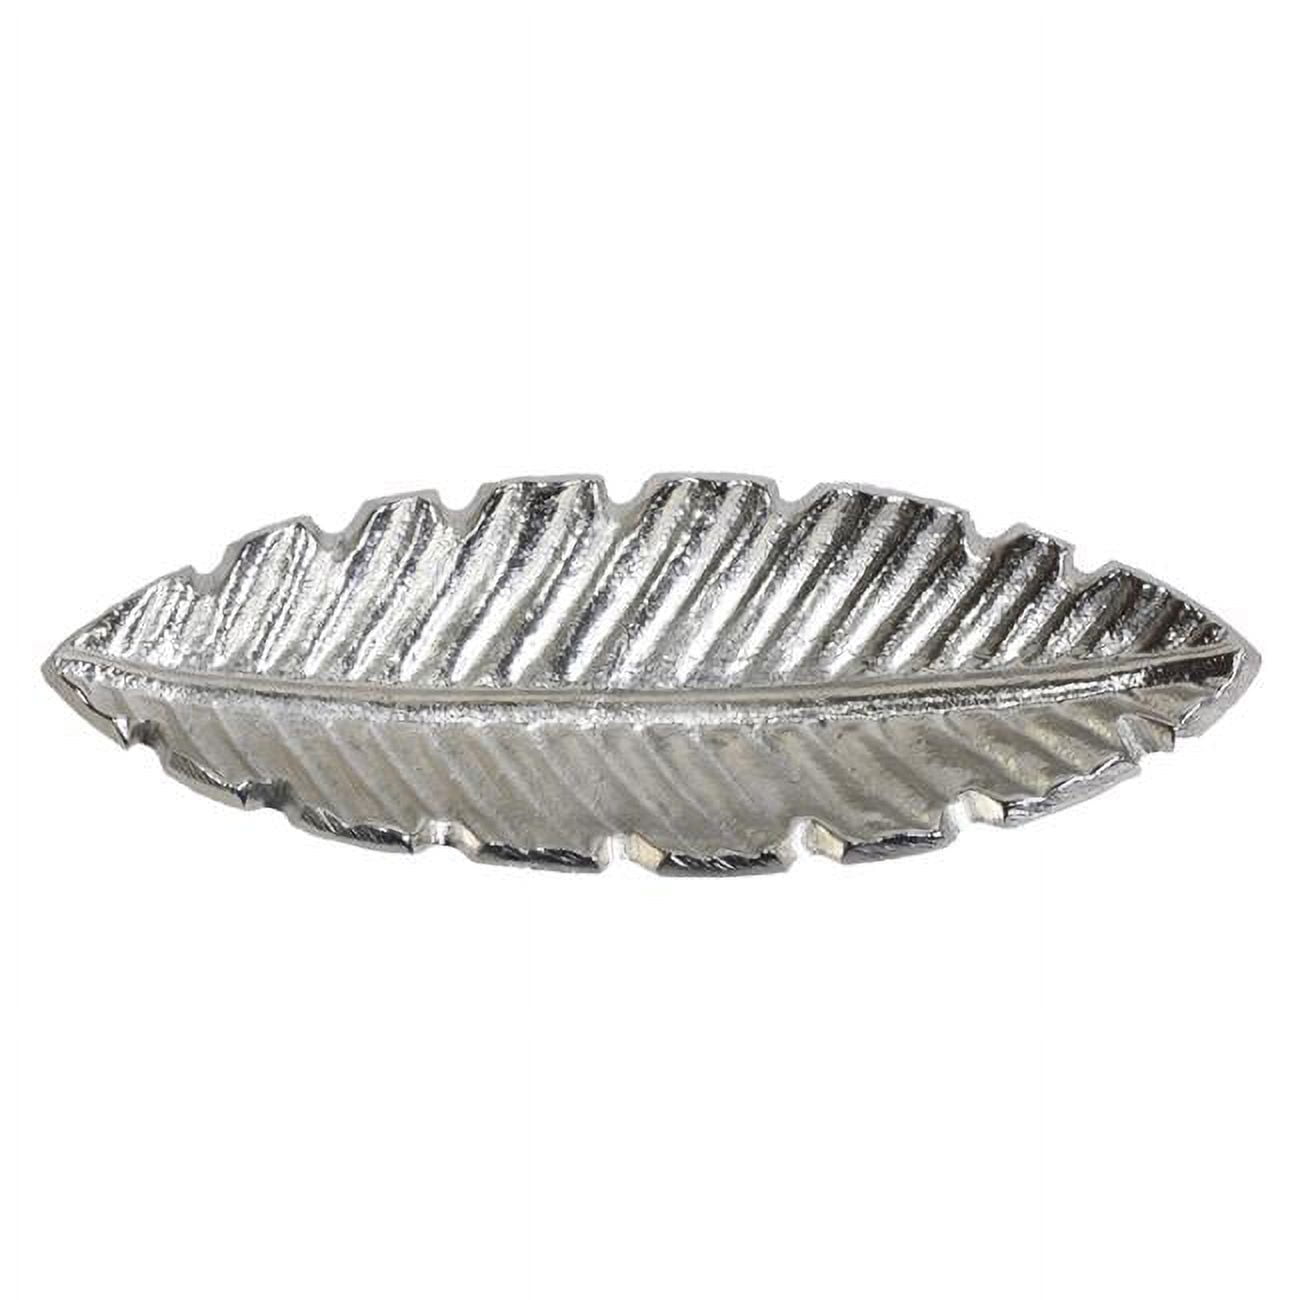 Picture of BBH Homes UBBBVK040AB2020SC1HS 7.28 x 2.36 x 0.78 in. Handmade Silver Coated Decorative Aluminum Tray